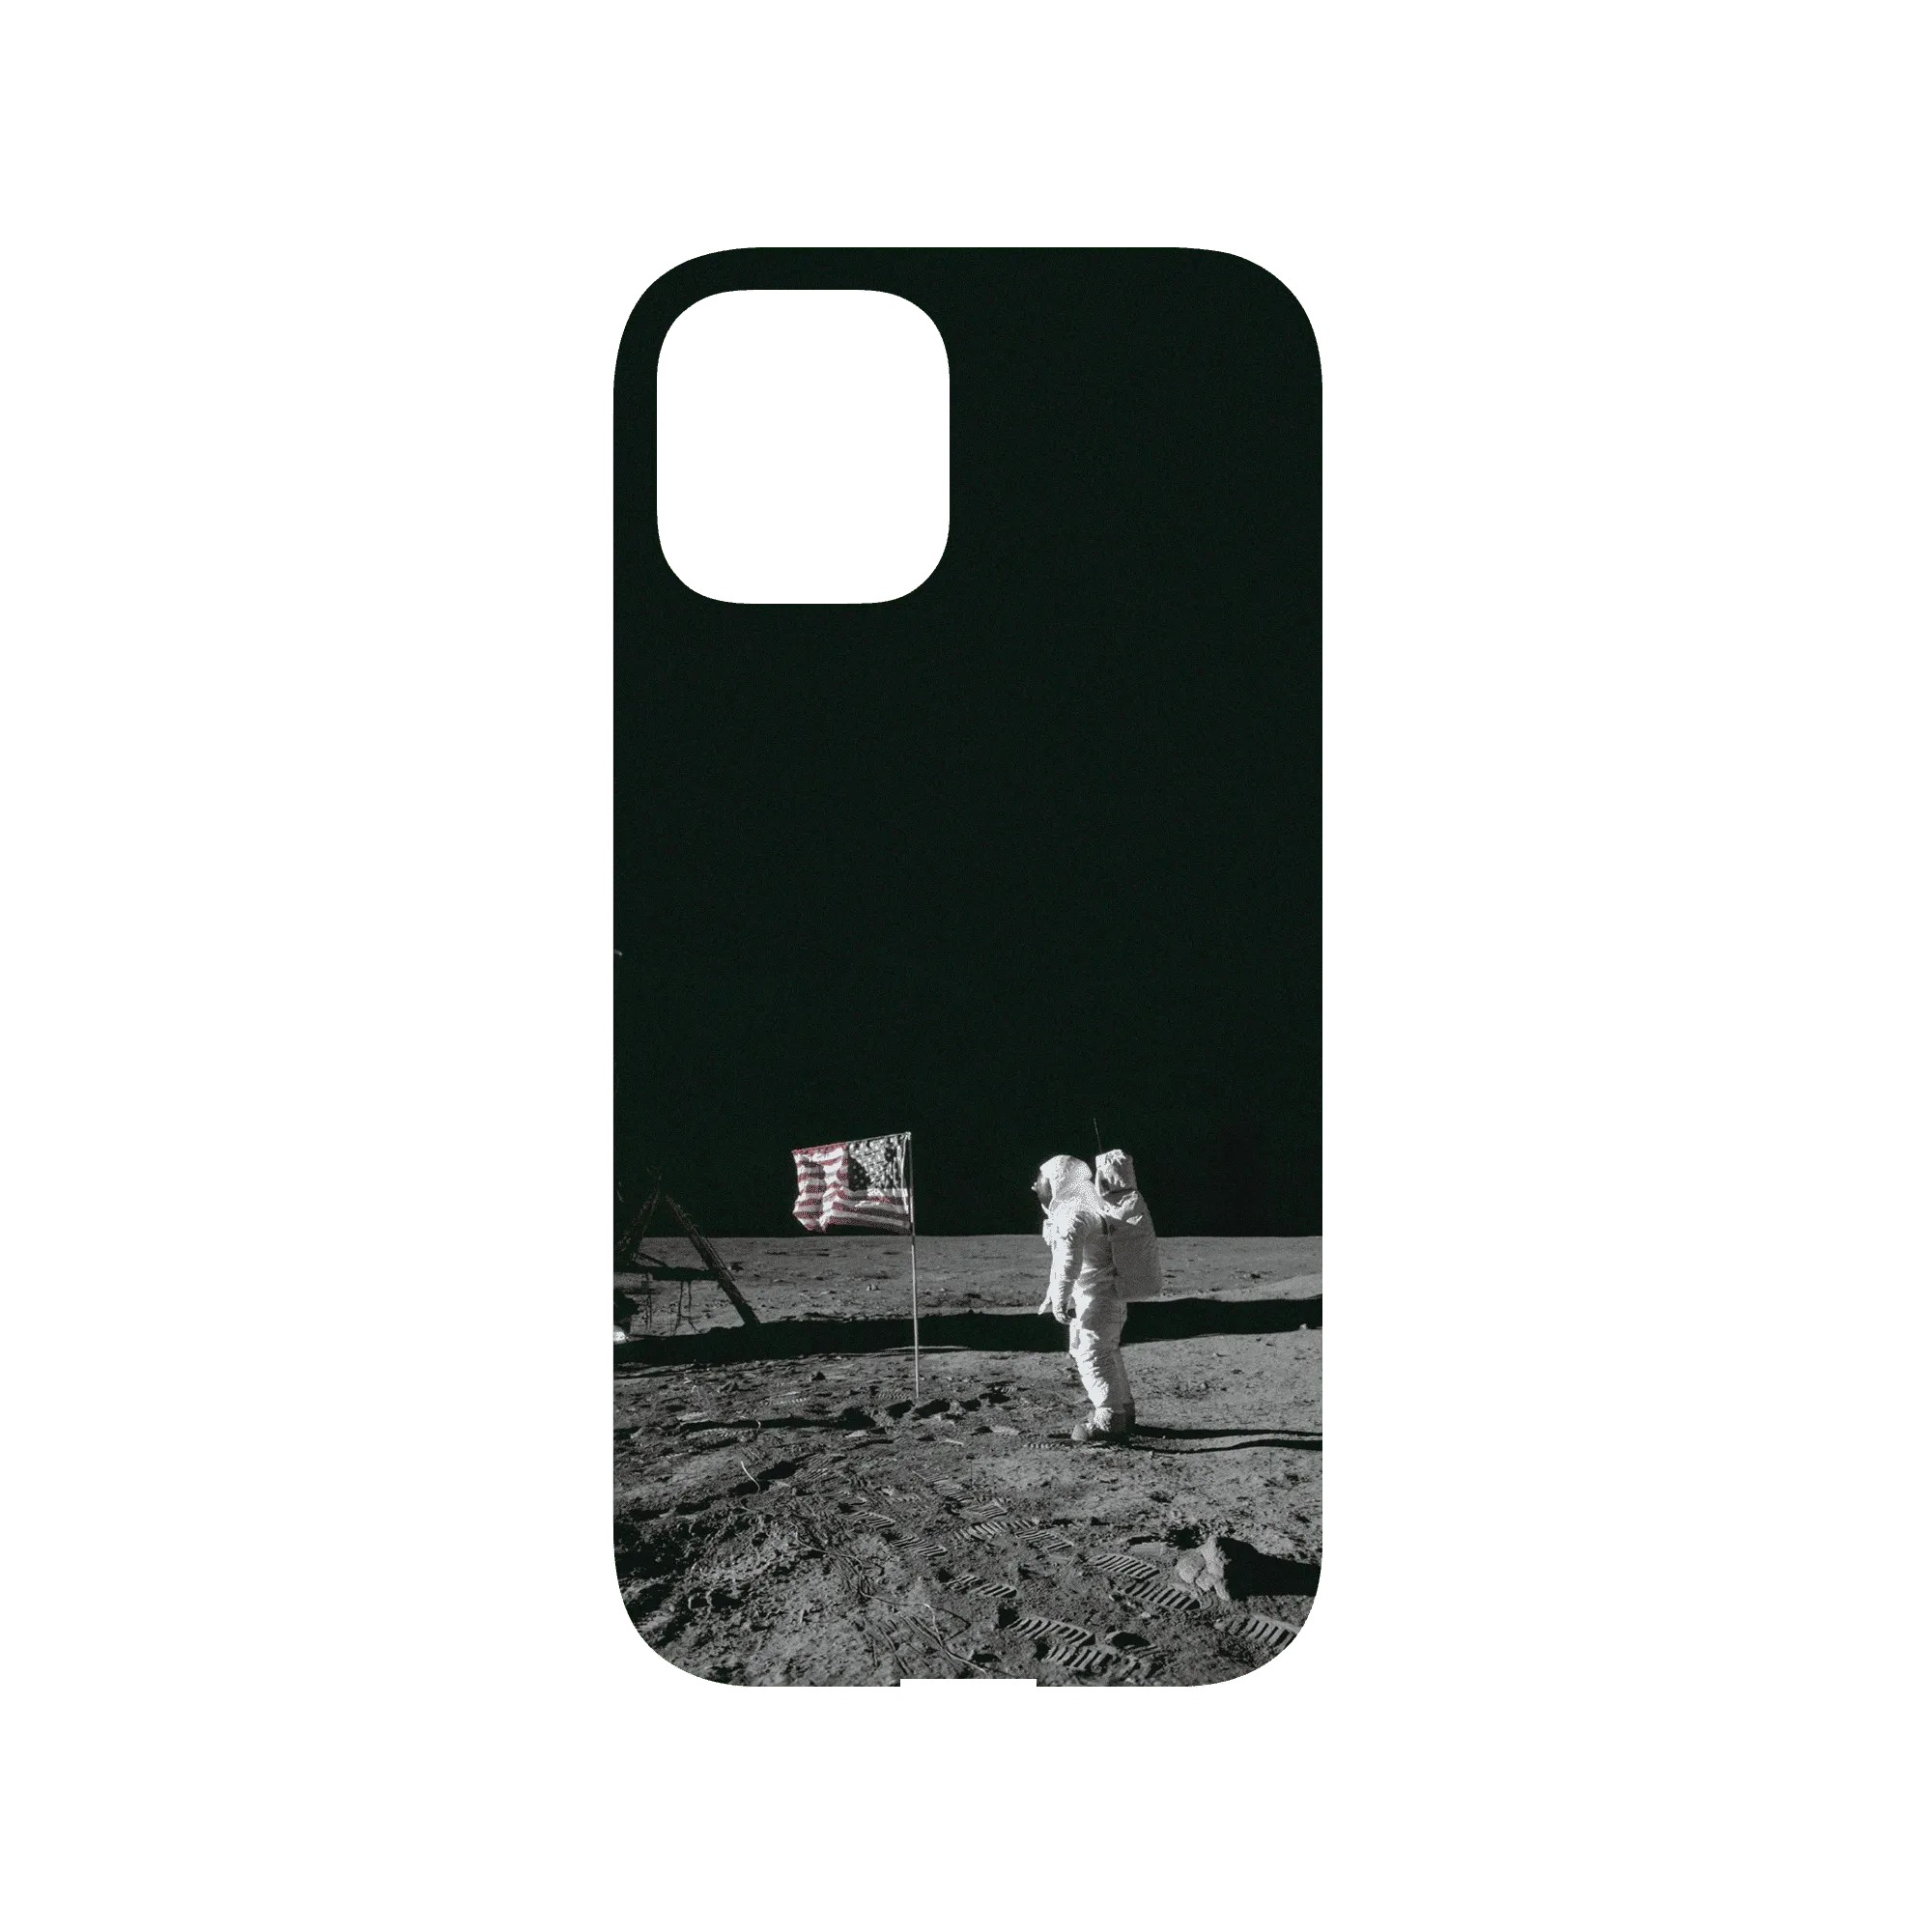 Cosmos Mod NX (MagSafe compatible) iPhone 12 Case - Apollo 11 - Astronaut Aldrin On The Moon Backplate